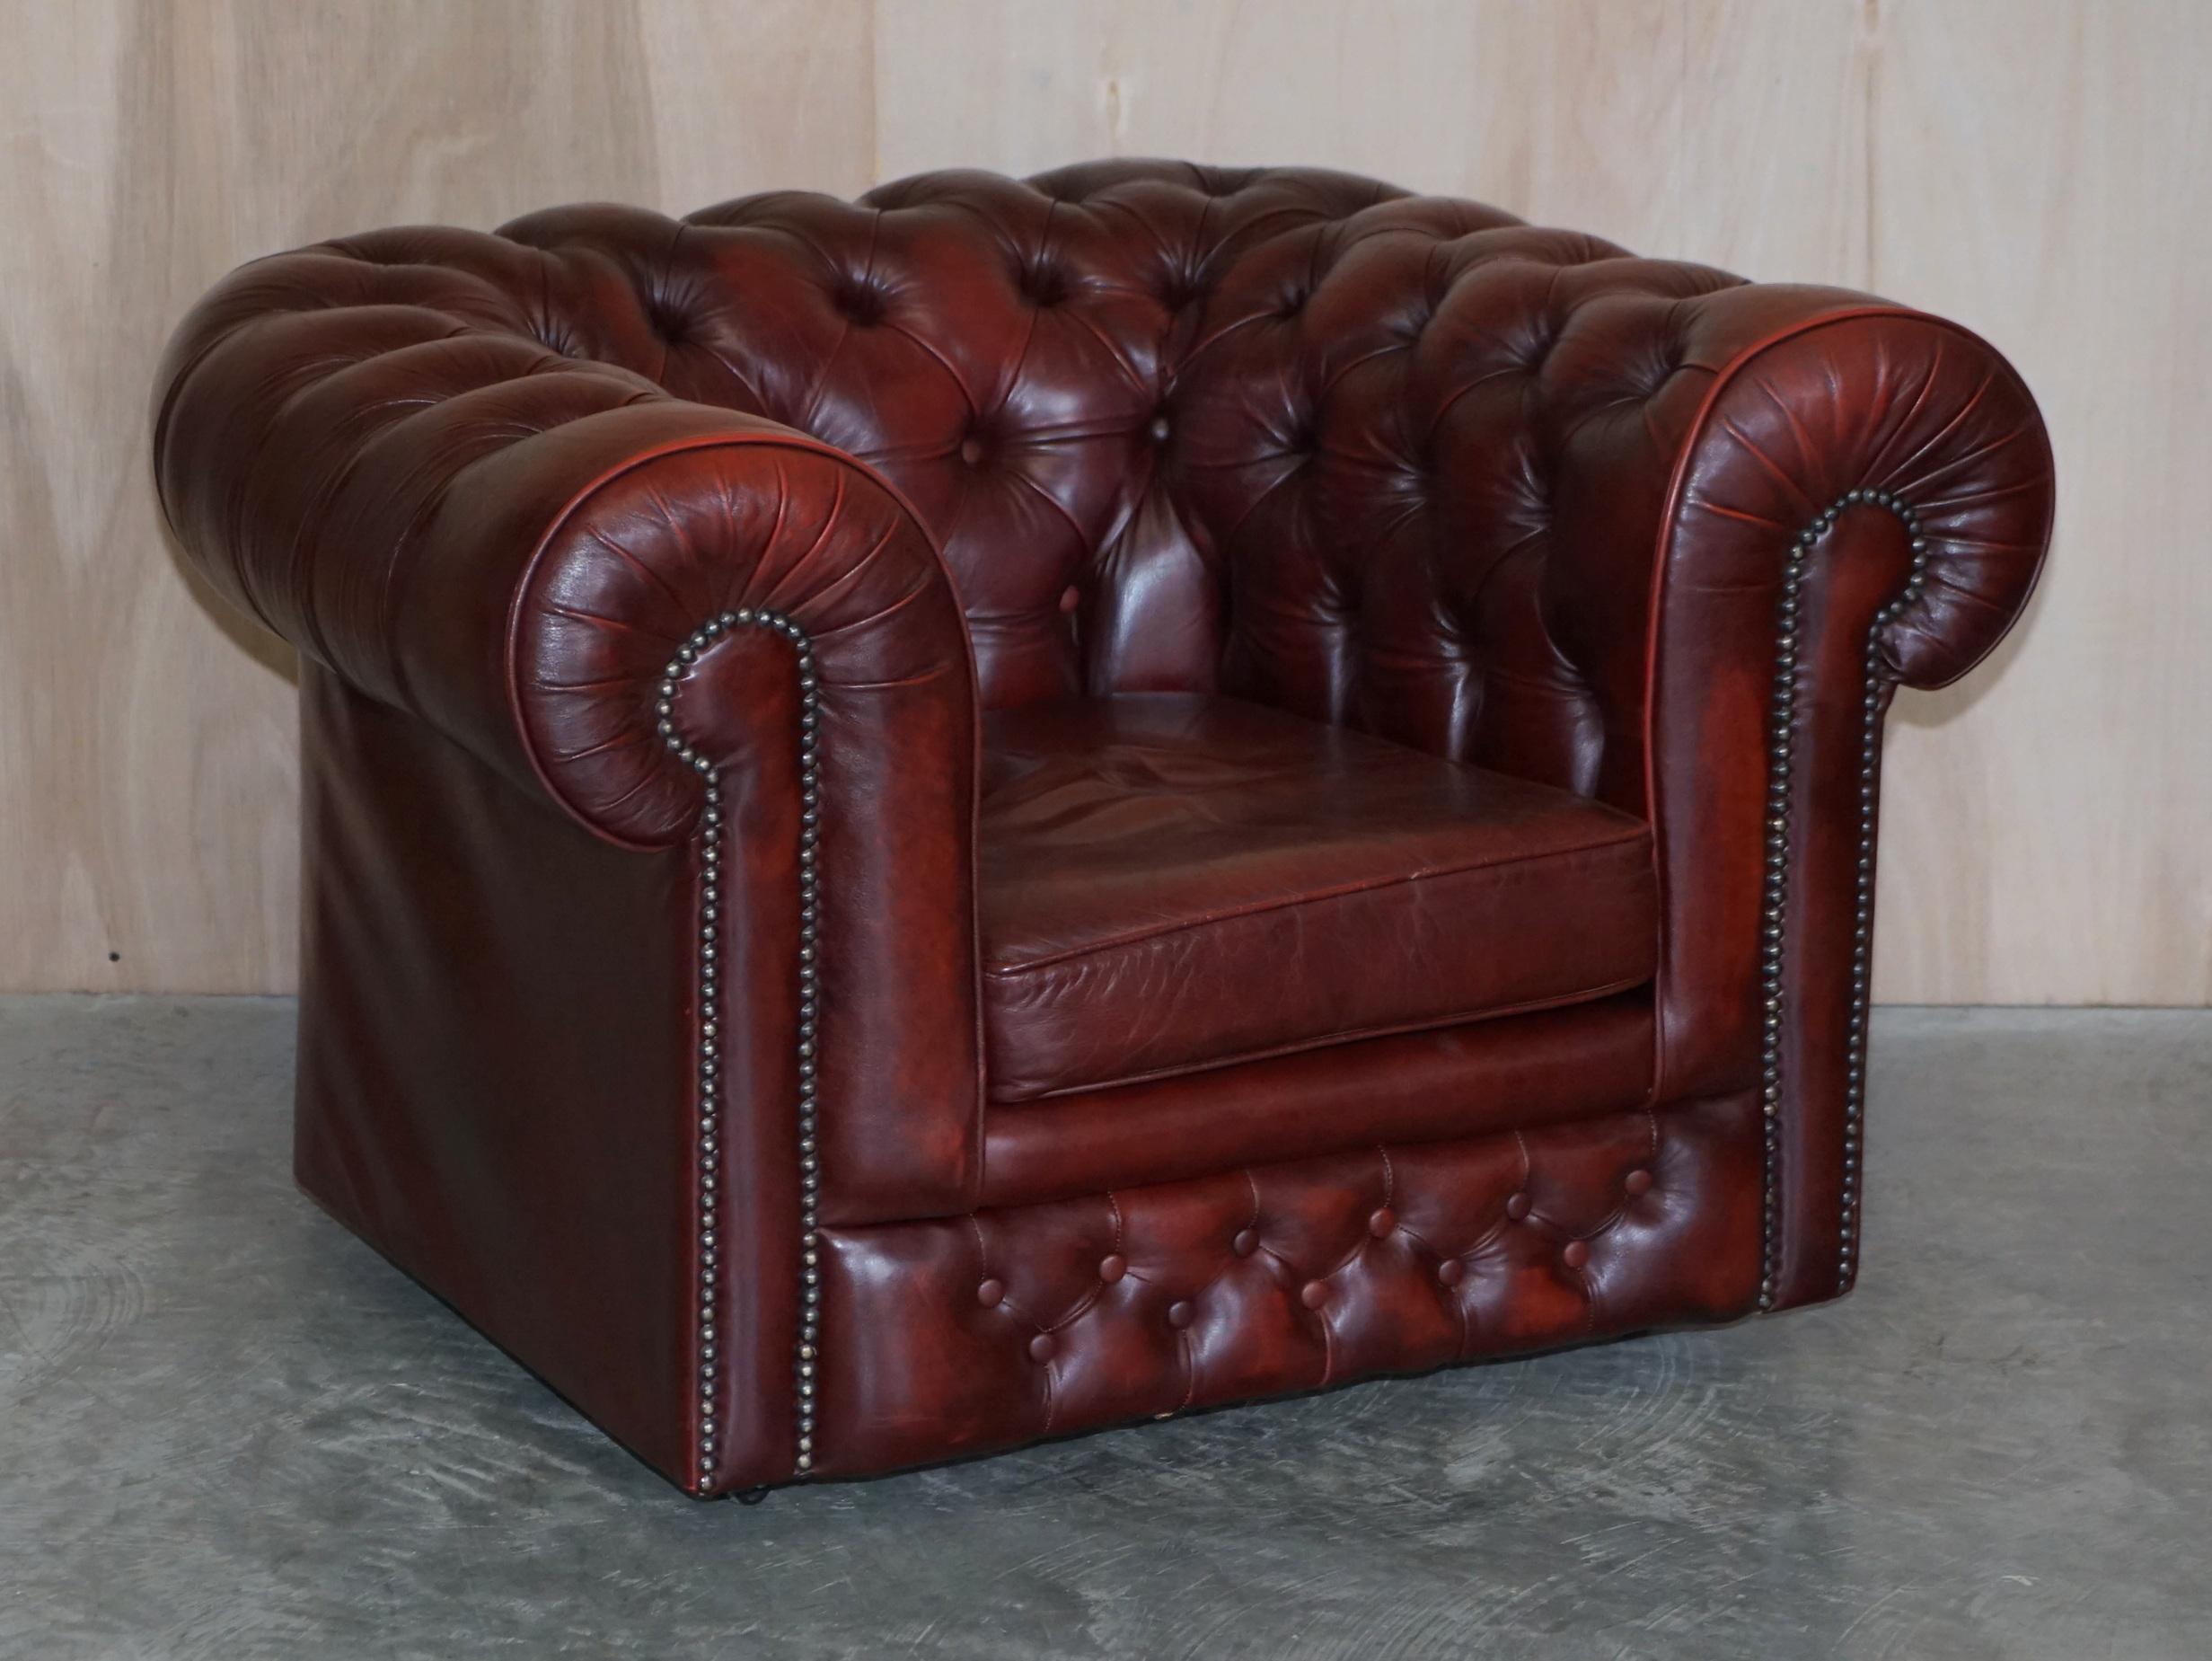 We are delighted to offer for sale this pair of stunning vintage Oxblood leather Chesterfield Club armchairs which are part of a suite

These are part of a suite as mentioned

A very good looking and well made pair, these are vintage around 50